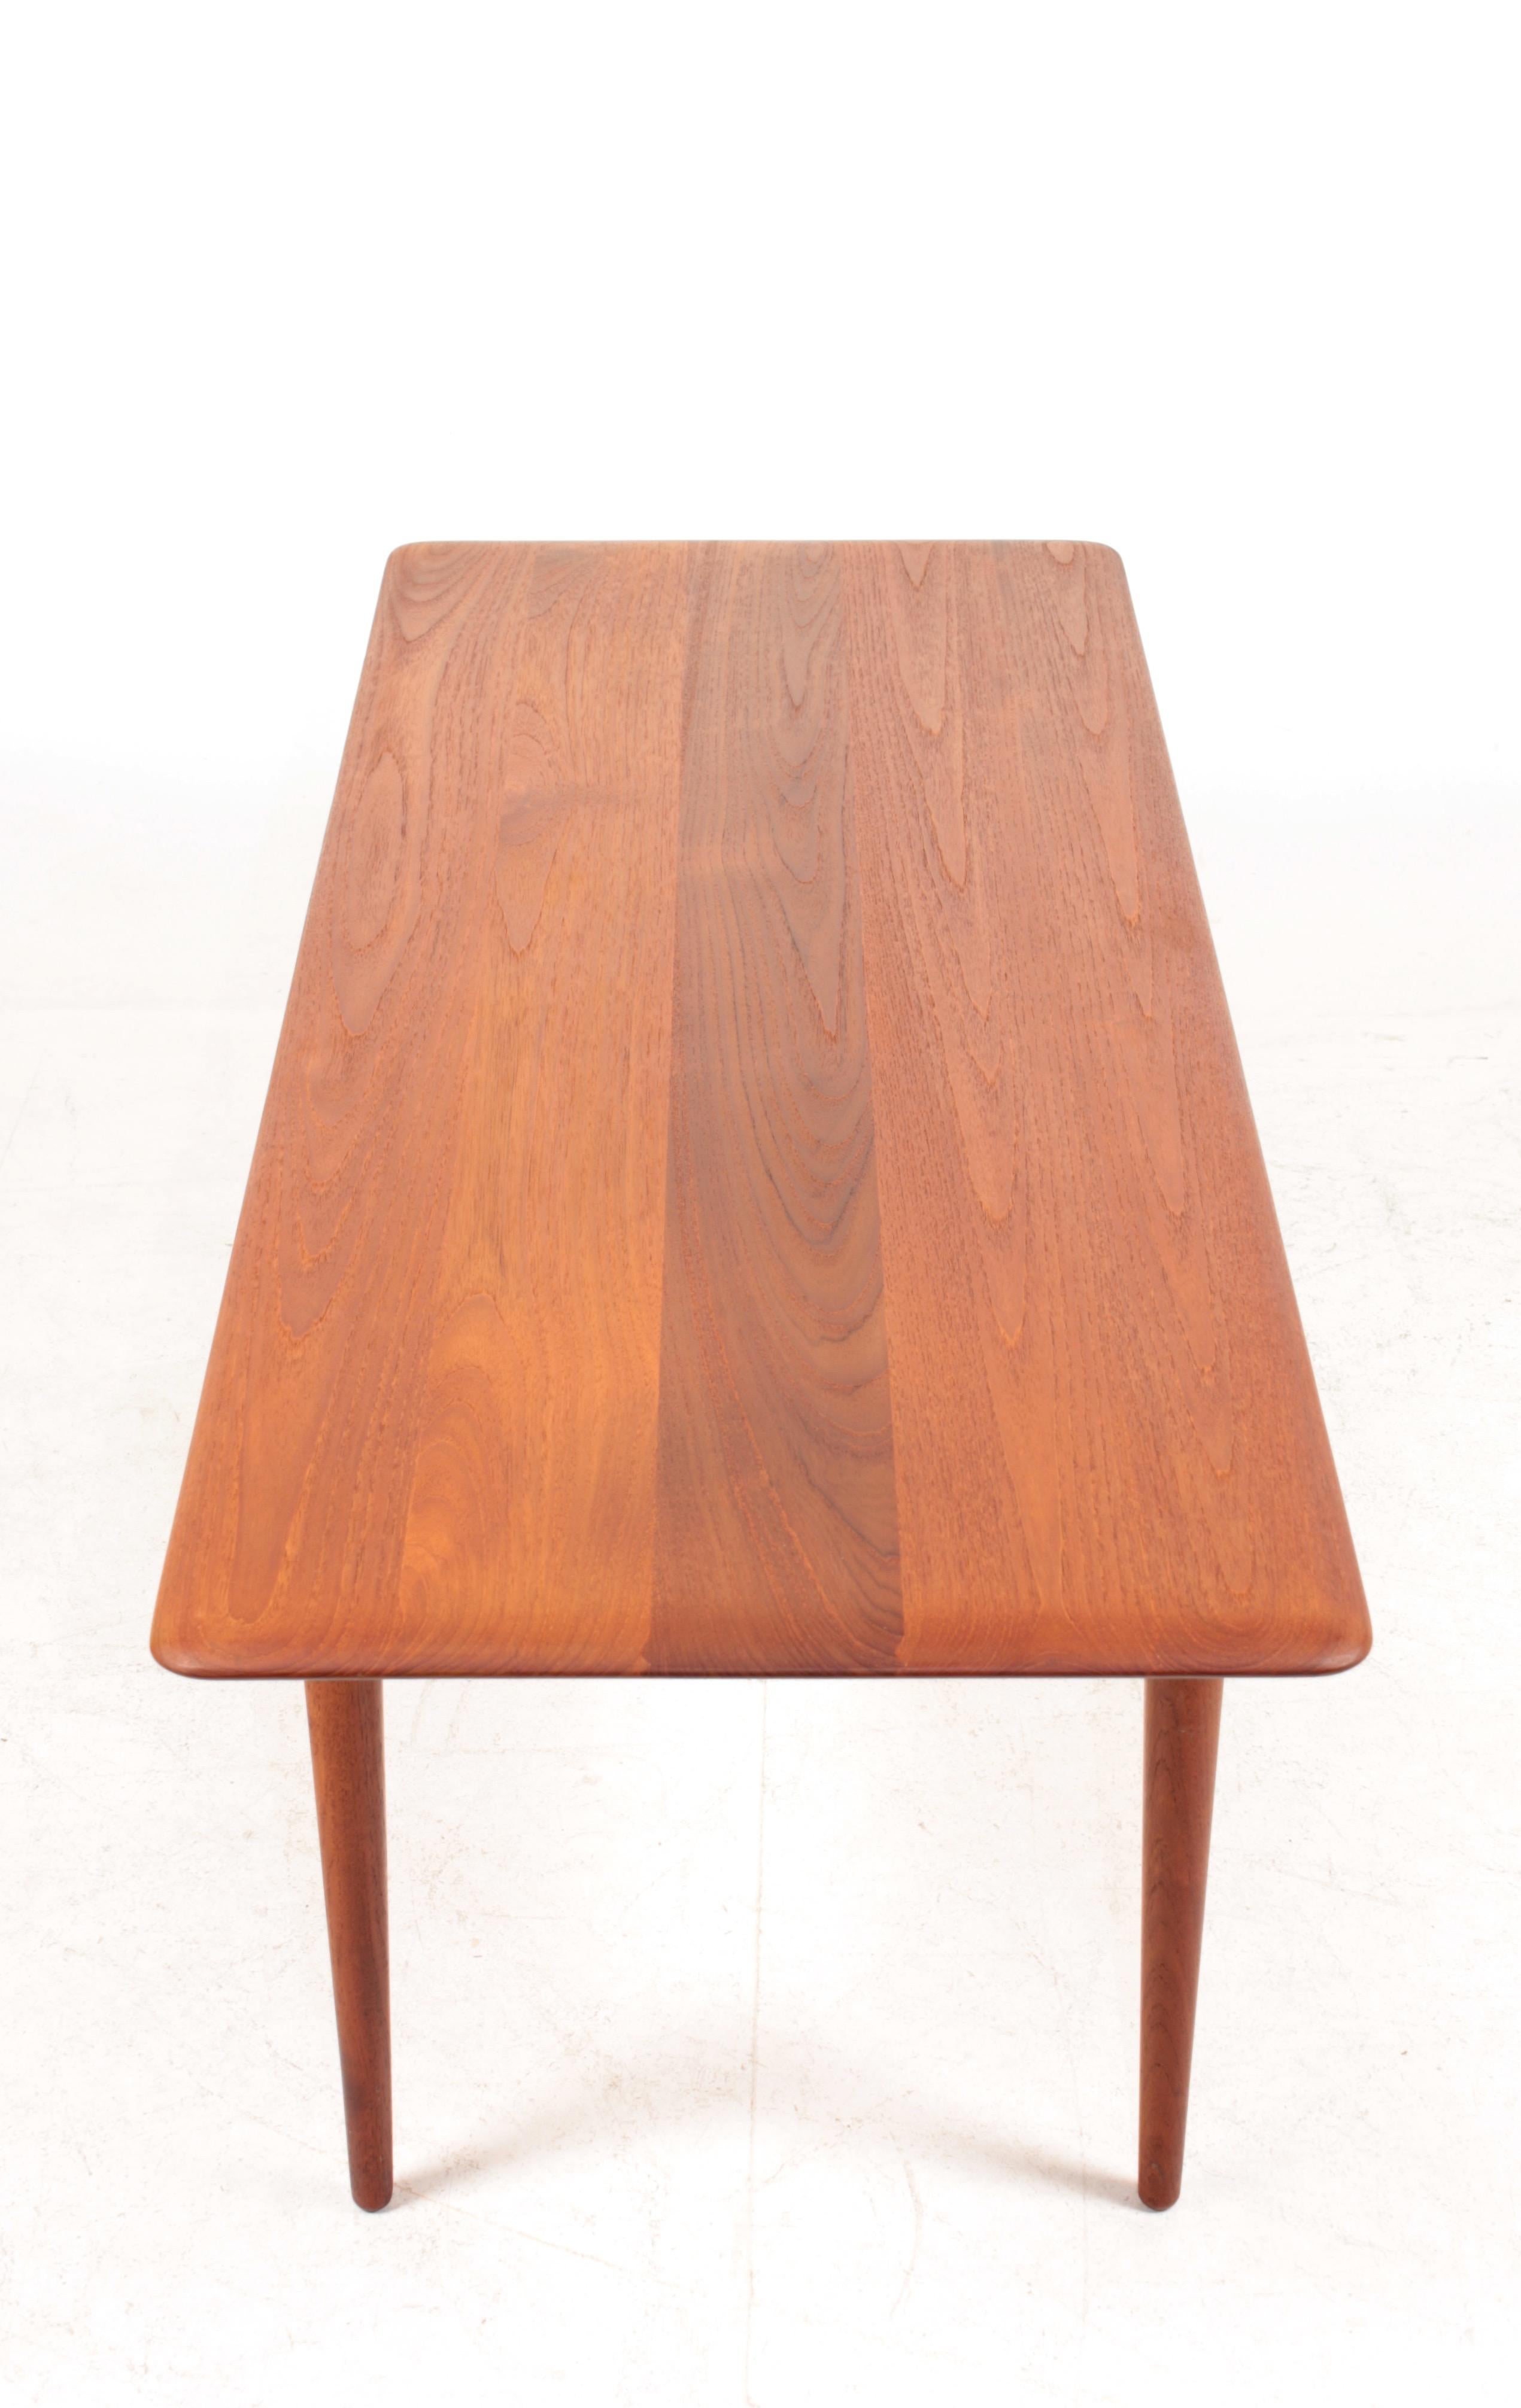 Brass Midcentury Low Table in Solid Teak and Cane by Hvidt & Mølgaard, Made in Denmark For Sale